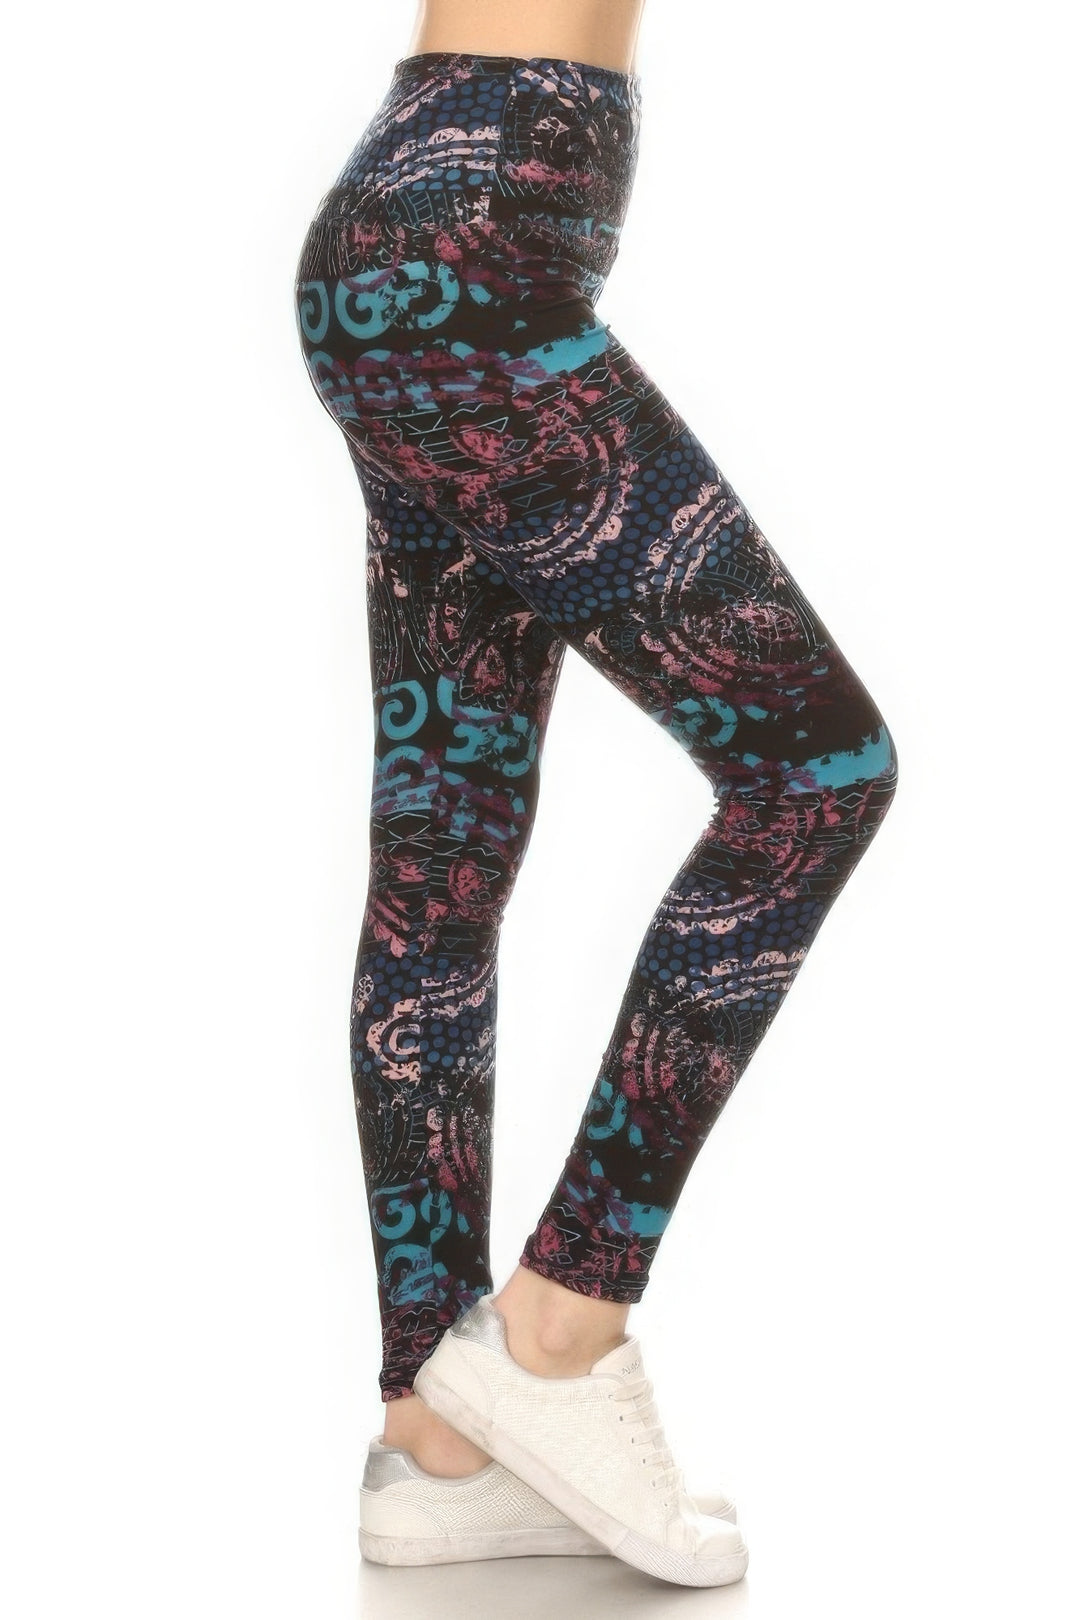 a person in black and blue patterned leggings